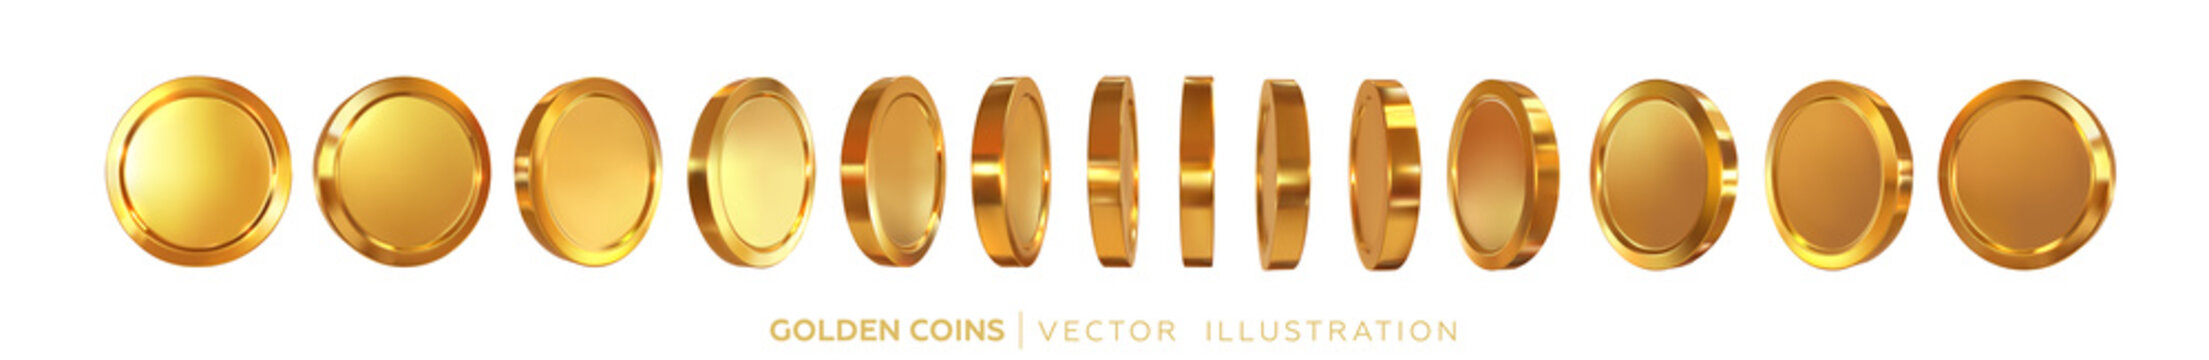 Gold coins rotating in different positions. A set of 3d money in different directions. Vector illustration